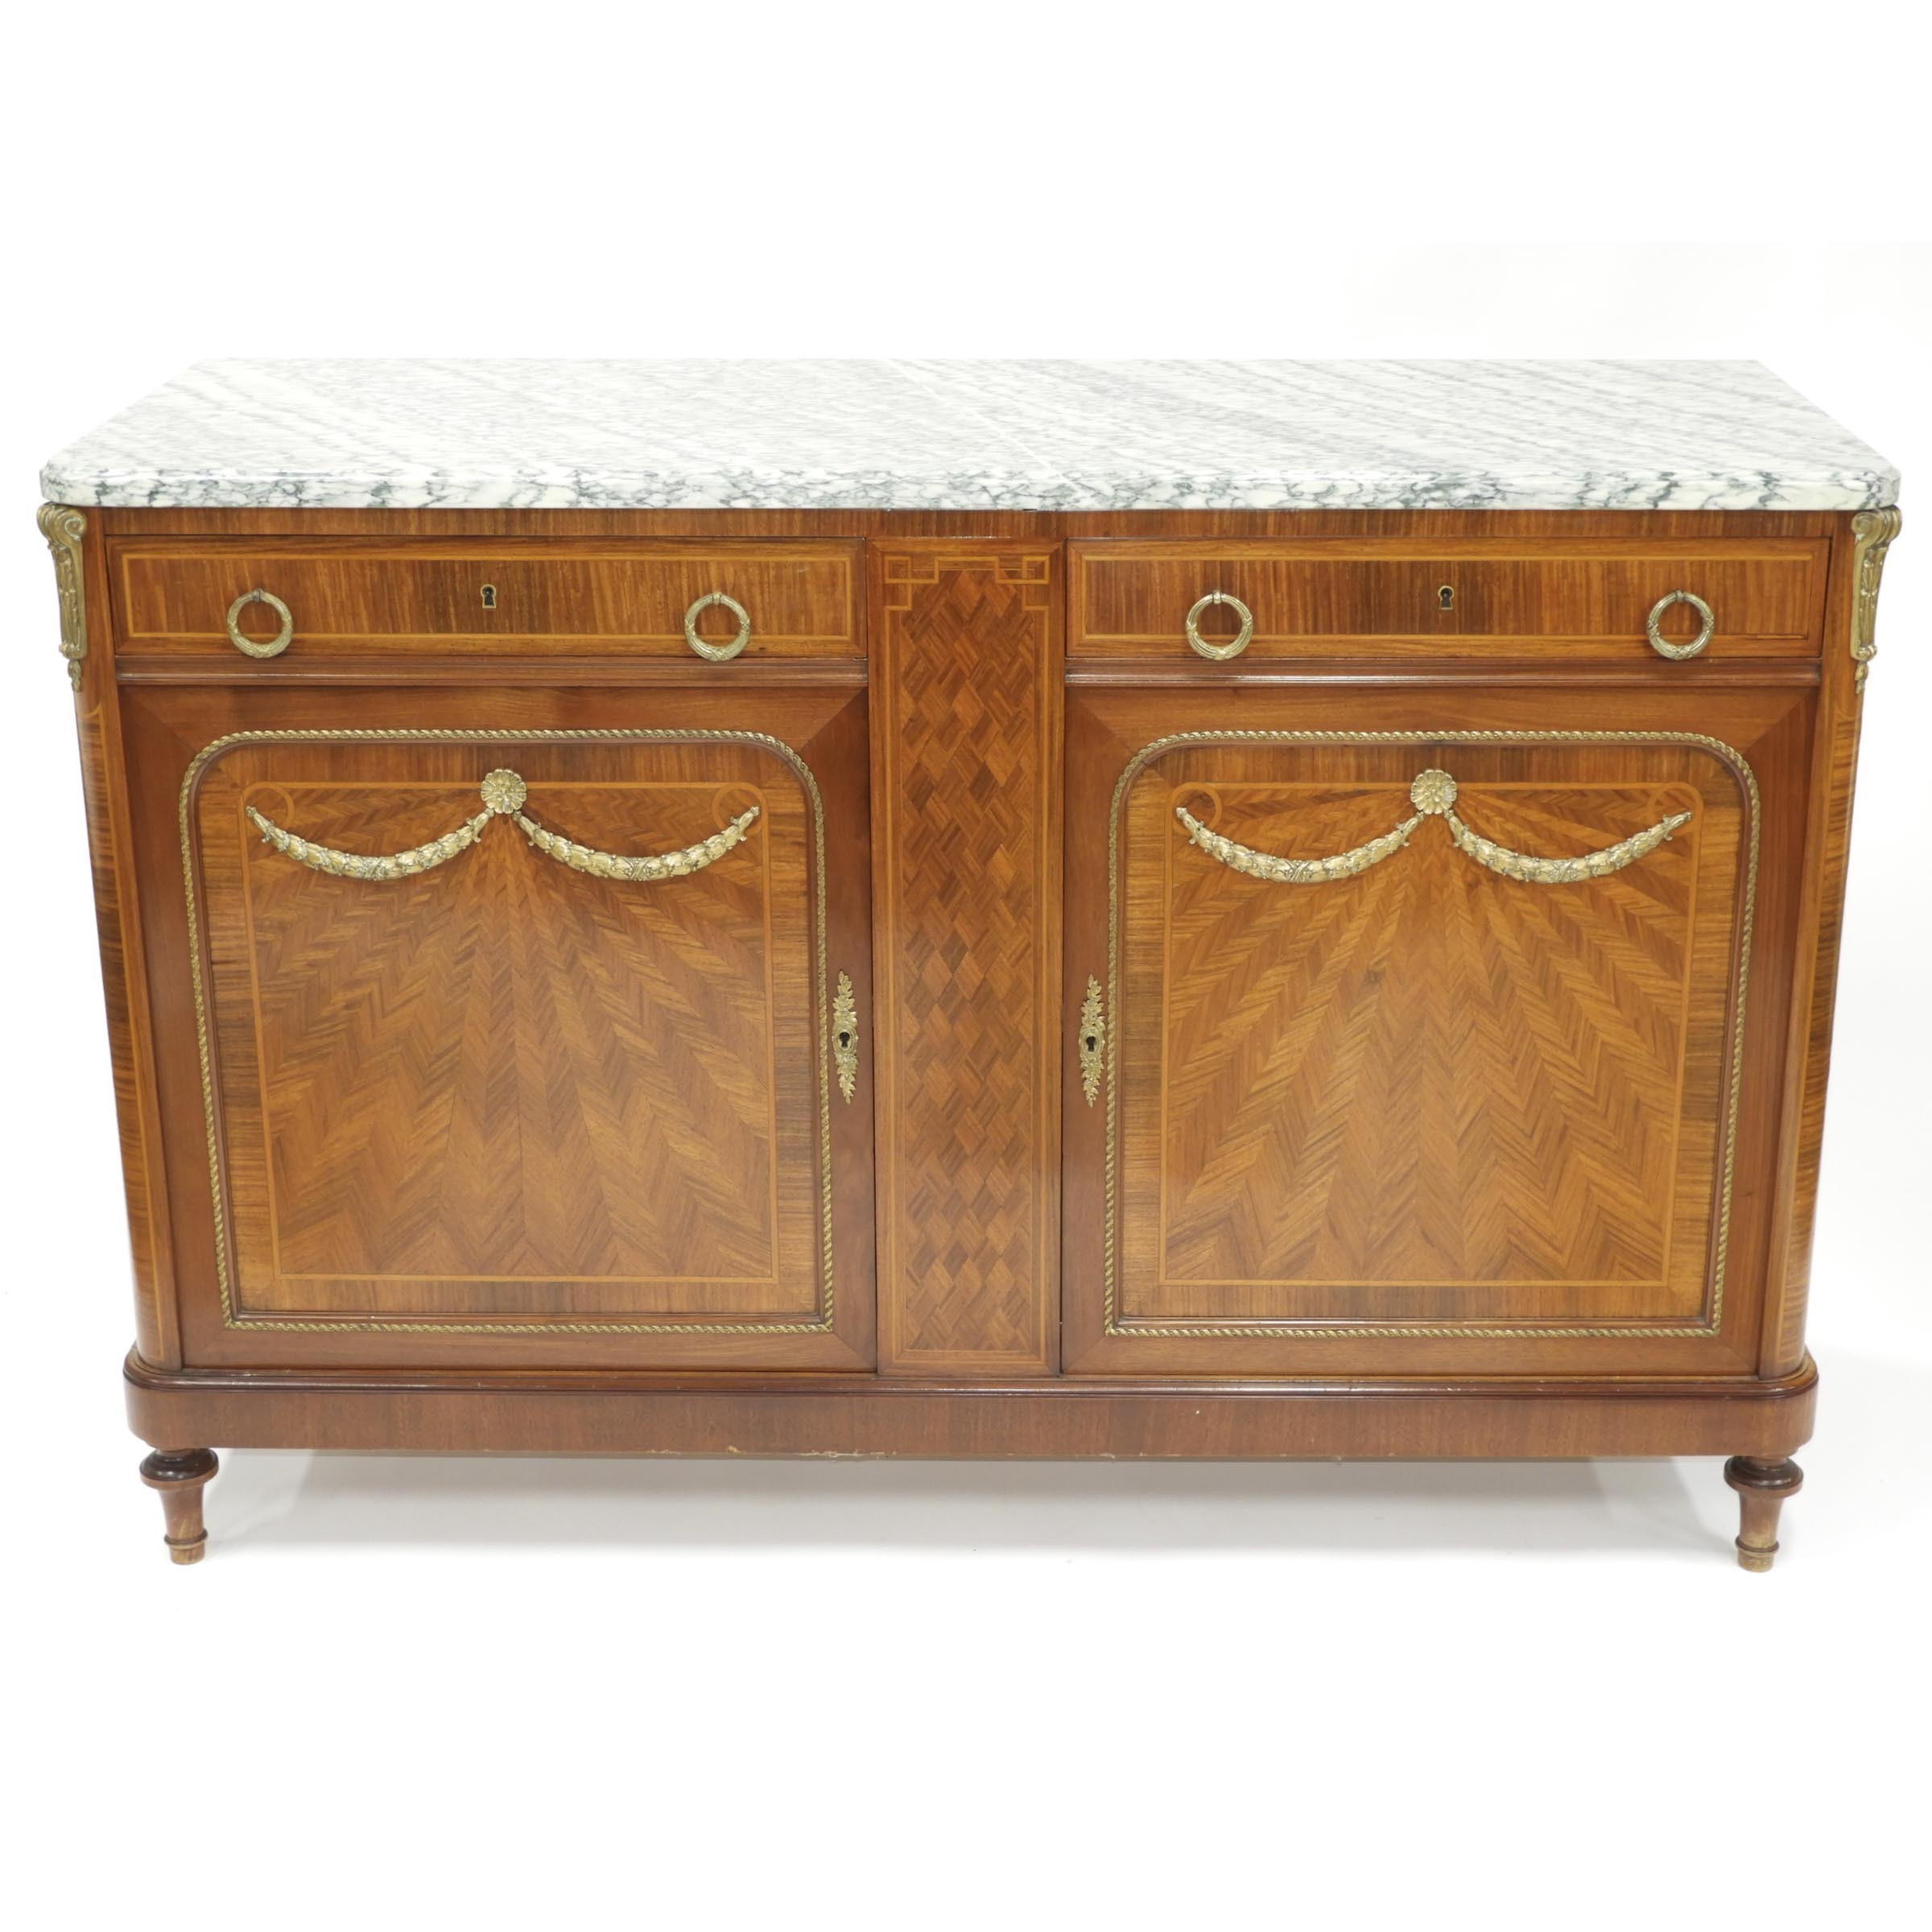 French Belle Époque Ormolu Mounted Satinwood Sideboard, early 20th century